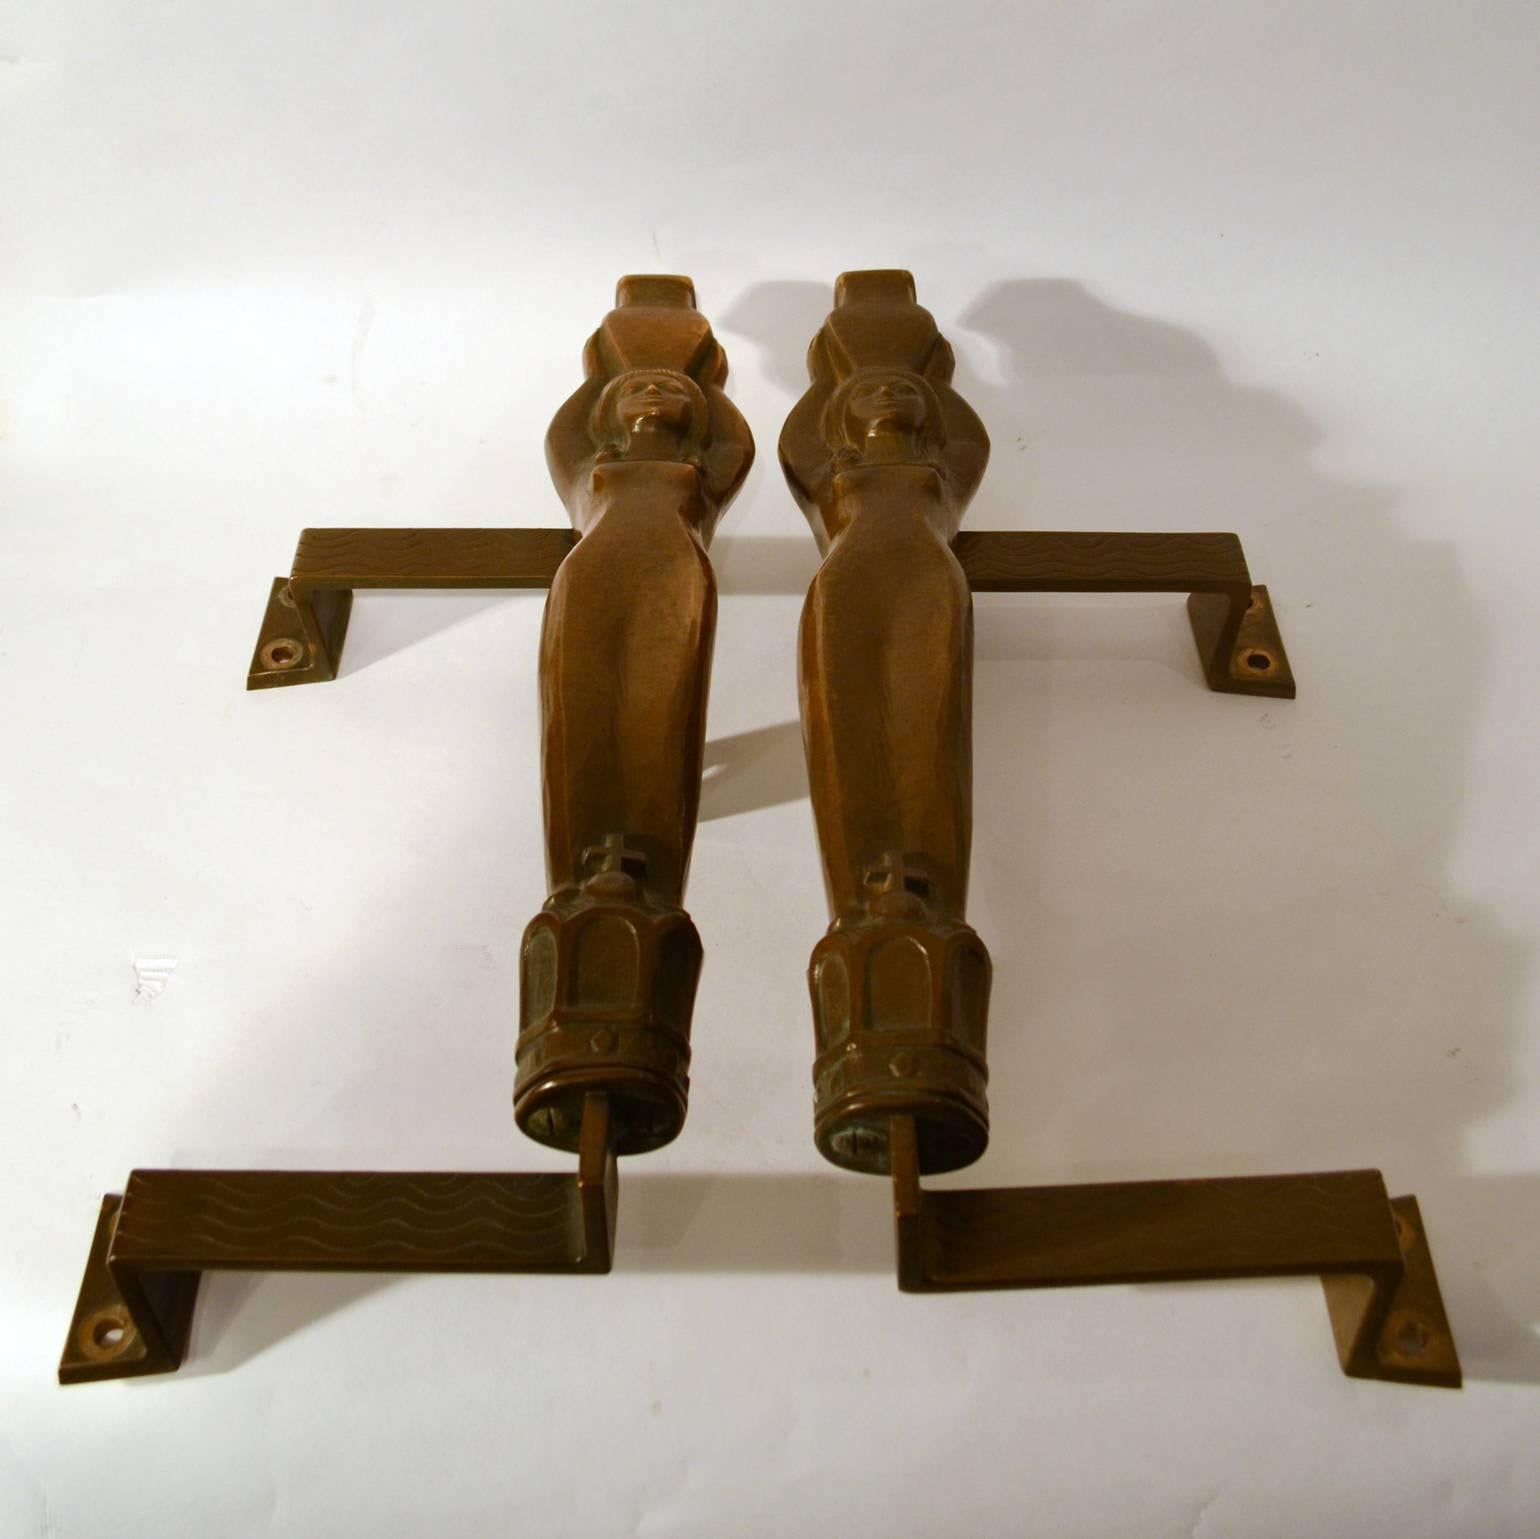 Original pair of Art Nouveau push and pull door handles in the shape of two water nymphs, originally from spa in the Alps. These large handles express the water nymphs carrying water jugs on their heads while they stand on crowns. The brackets are